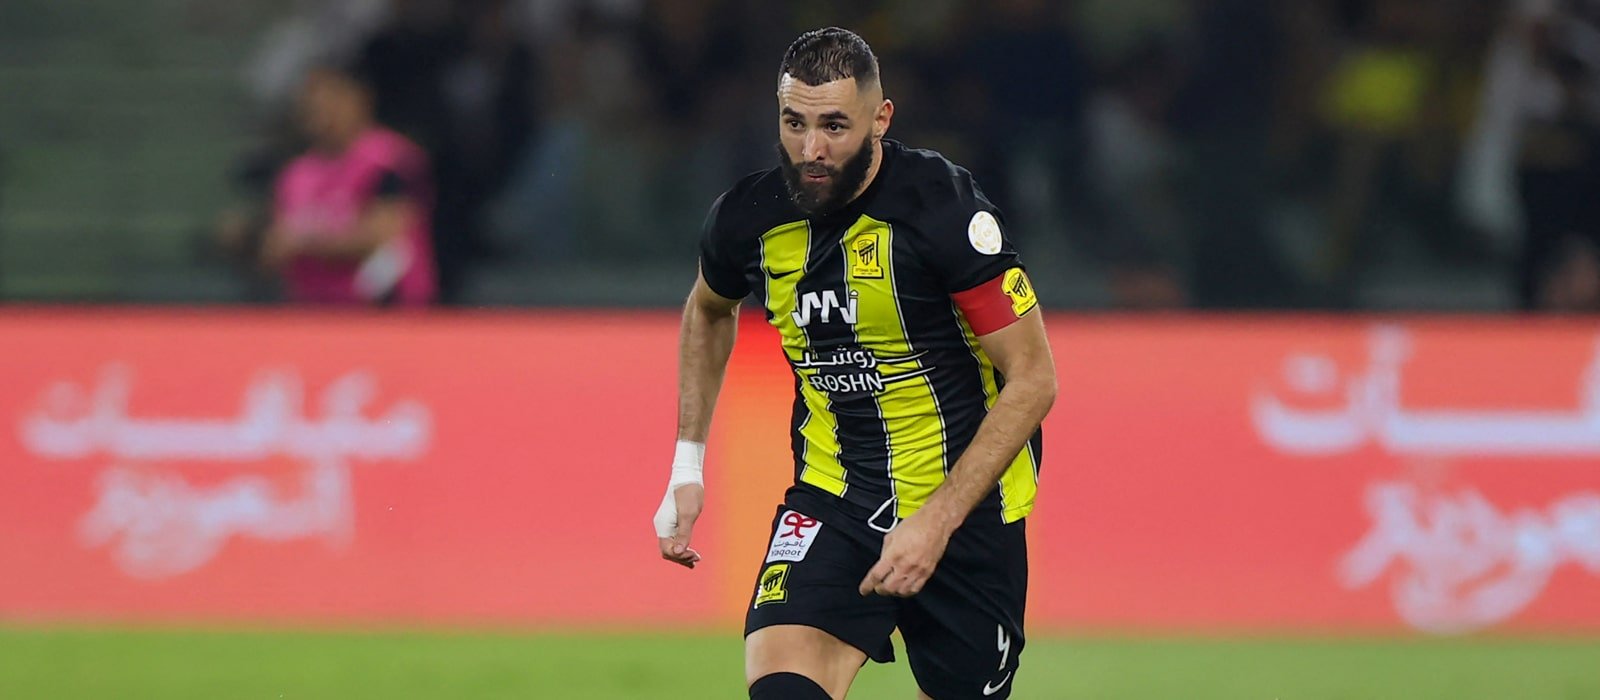 Karim Benzema to stay at Al-Ittihad amid rumours of potential move to Manchester United – Man United News And Transfer News